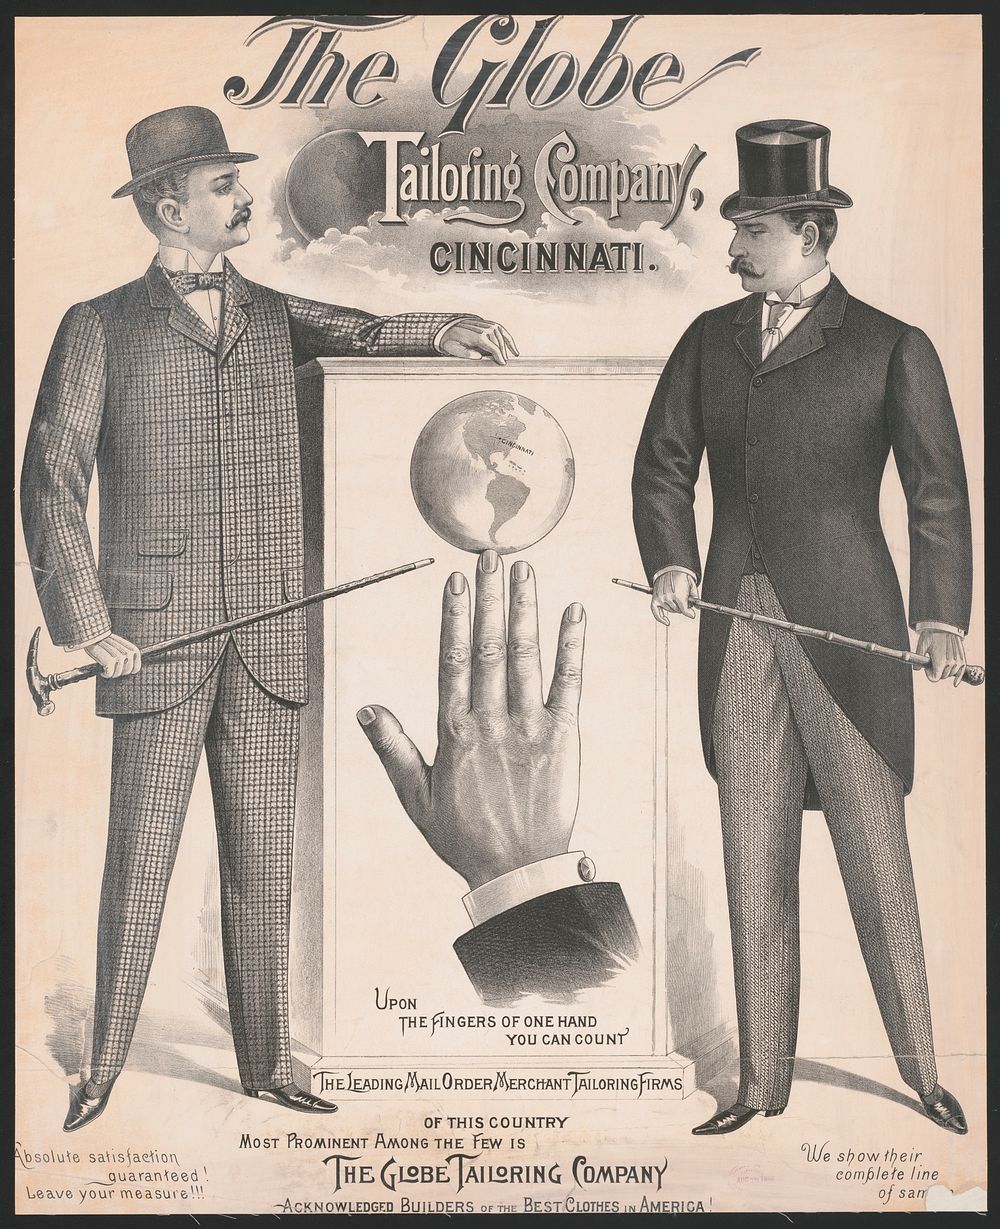 The Globe Tailoring Company, Cincinnati.  Upon the fingers of one hand you can count the leading mail order merchant…